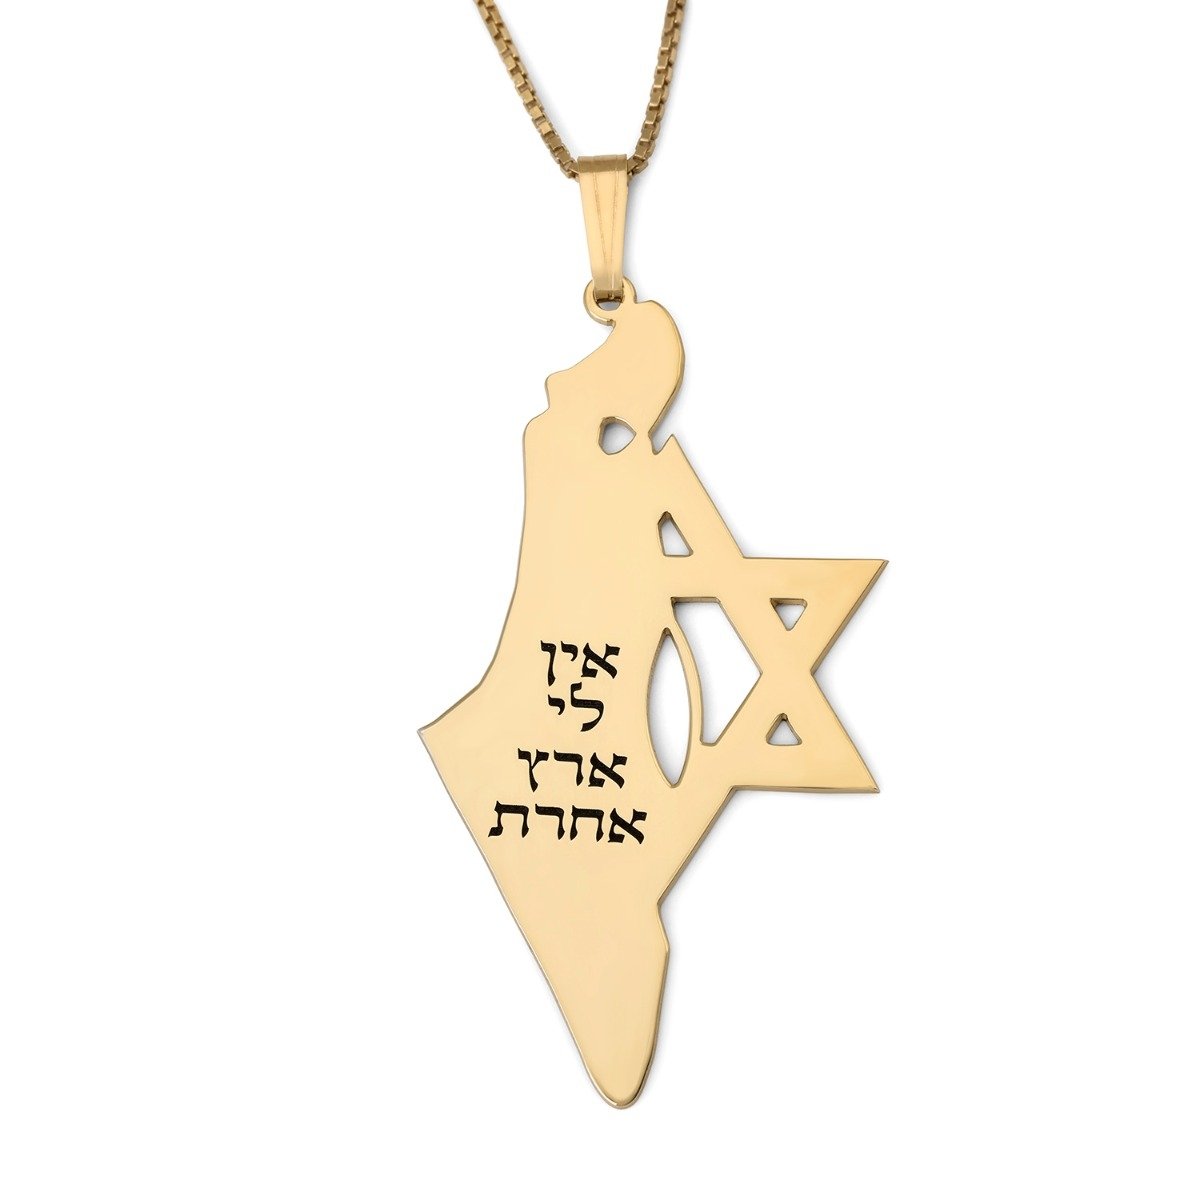 Luxury Thickness No Other Land Map of Israel Necklace with Star of David - Silver or Gold-Plated - 1